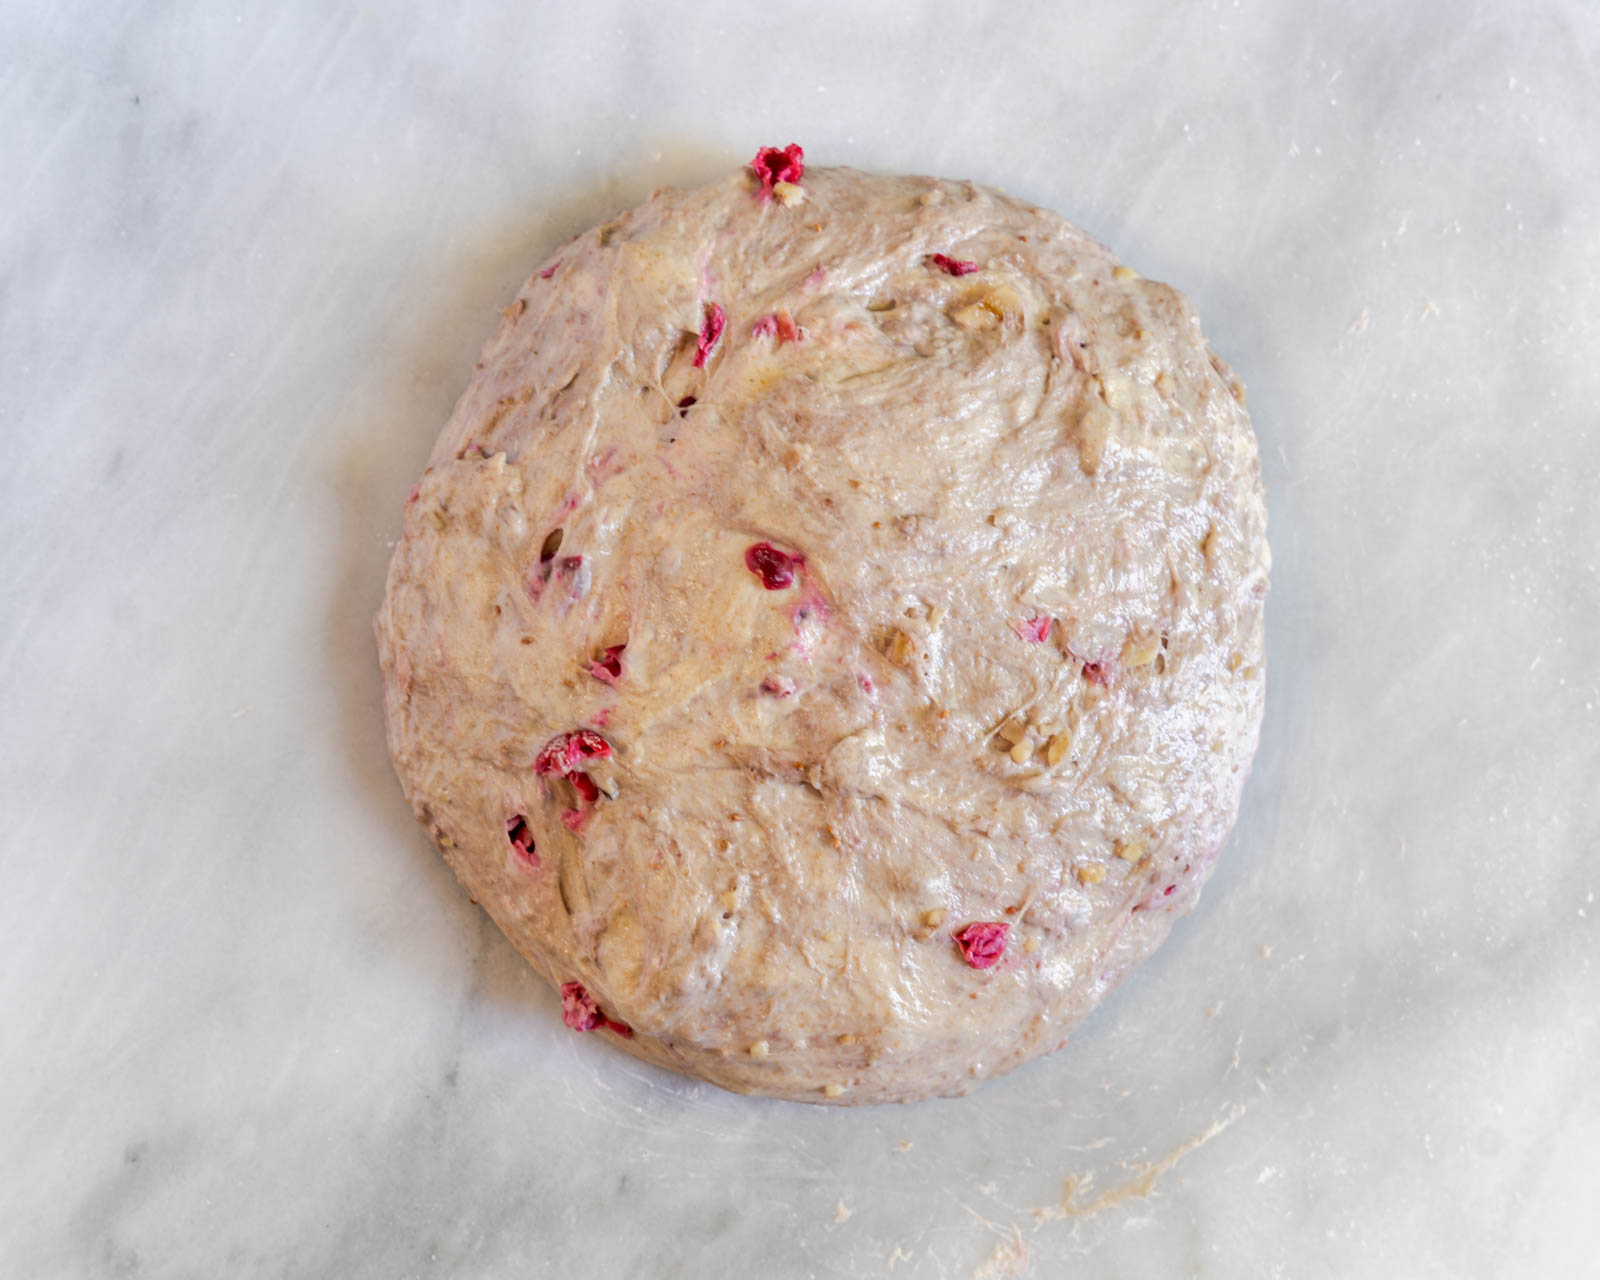 cranberry sourdough bread first shaping into a round loaf.